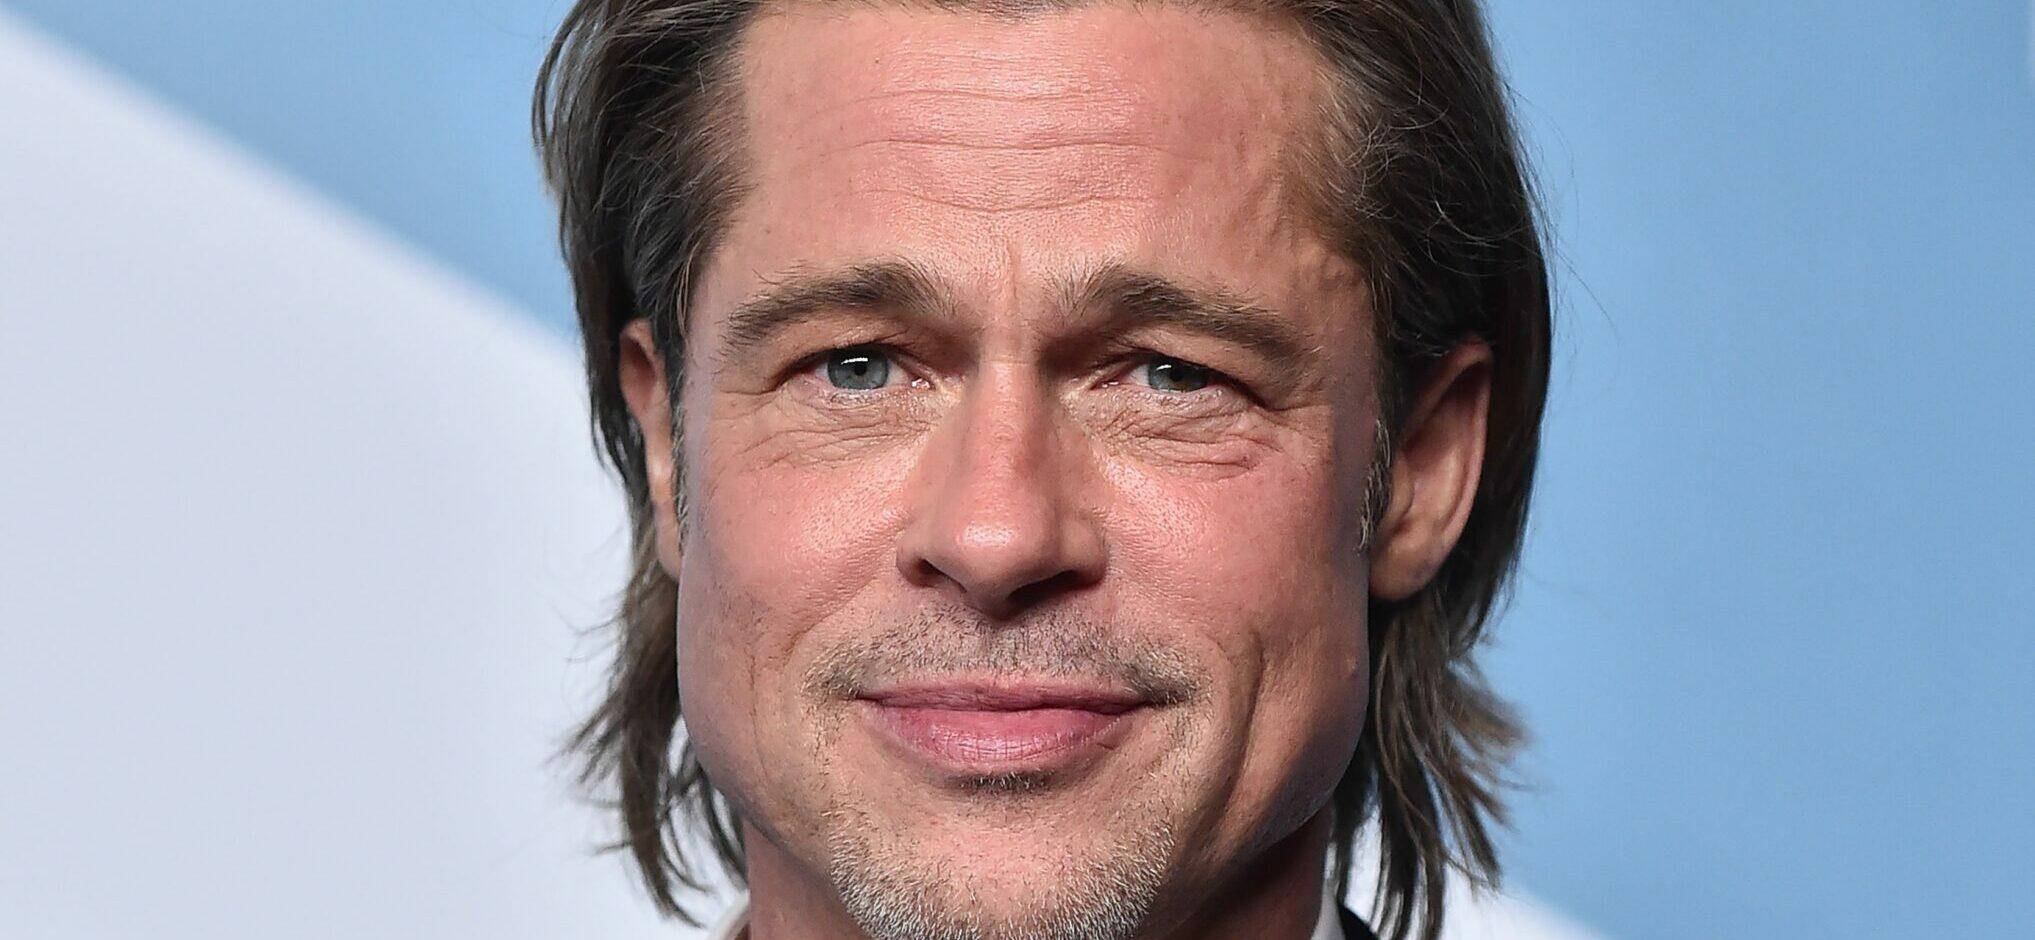 Brad Pitt 'would love to date again' but 'hates' the dating